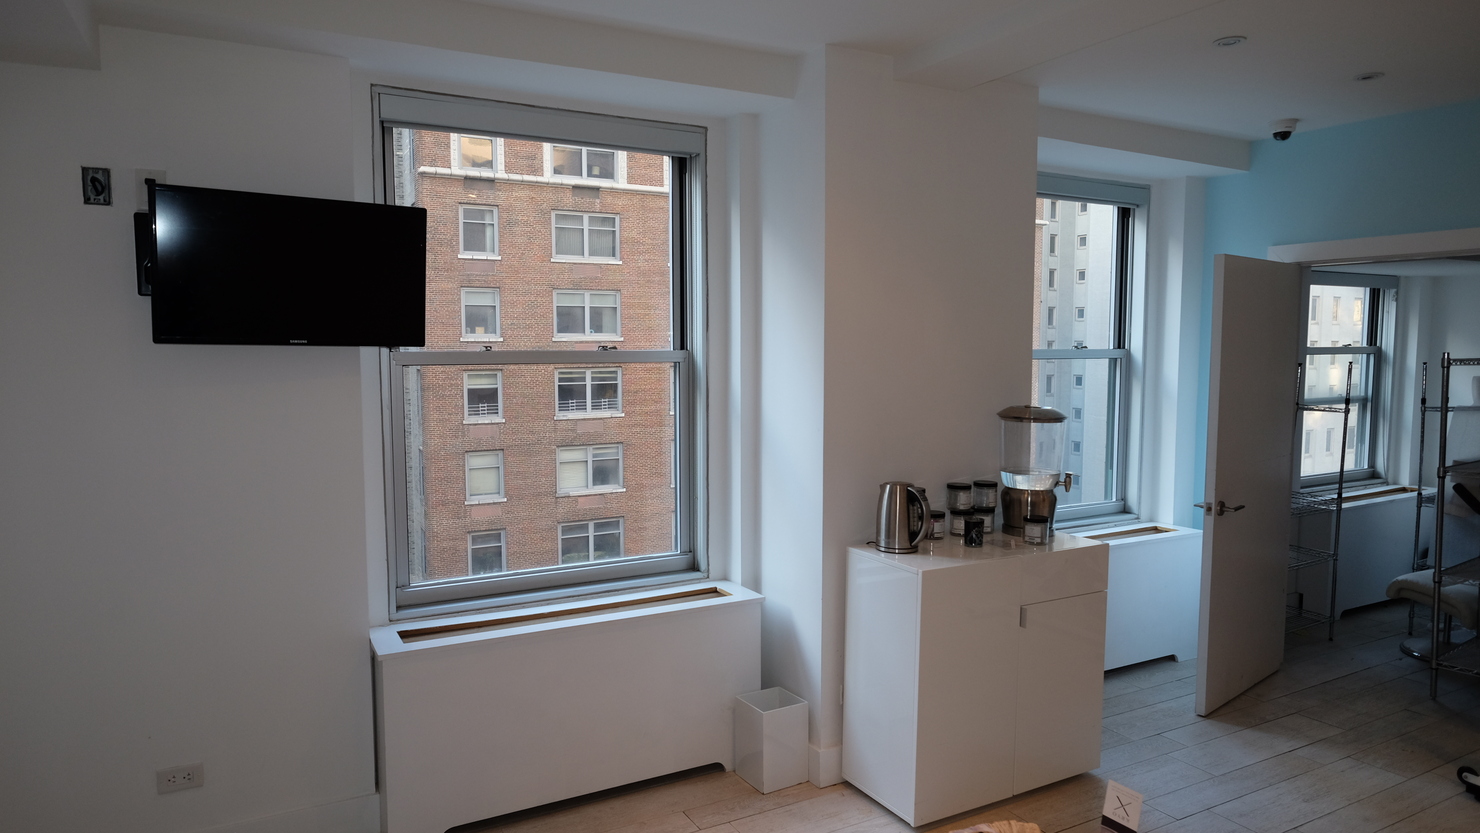 58 West 57th Street Office Space - Large Windows